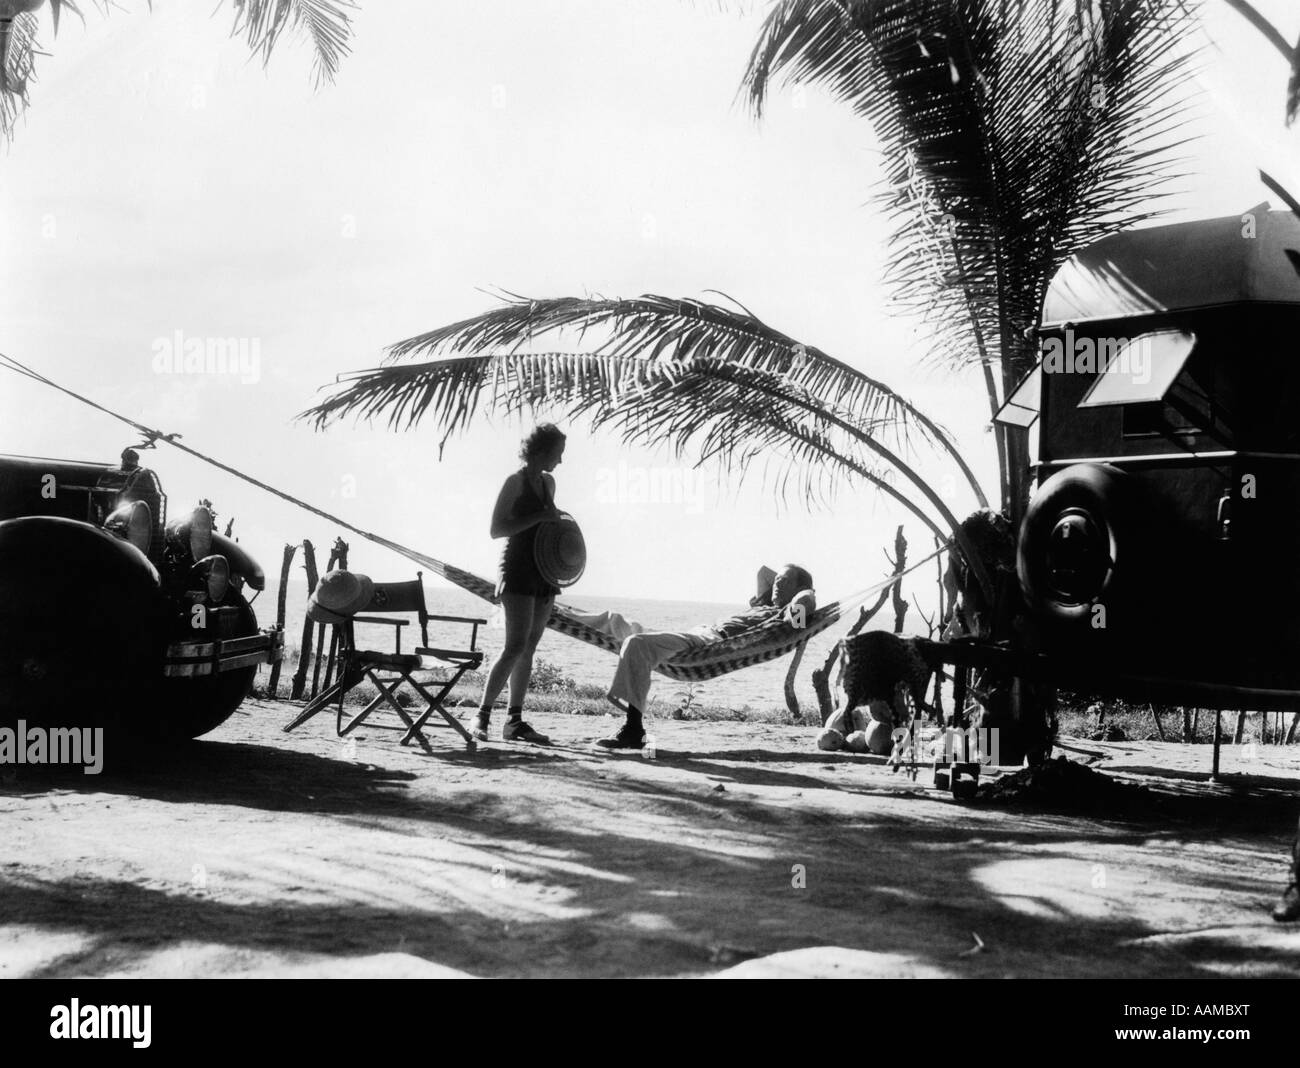 1930s COUPLE MAN WOMAN ON VACATION WITH TOURING AUTOMOBILE AND CAMPING TRAILER IN SILHOUETTE Stock Photo